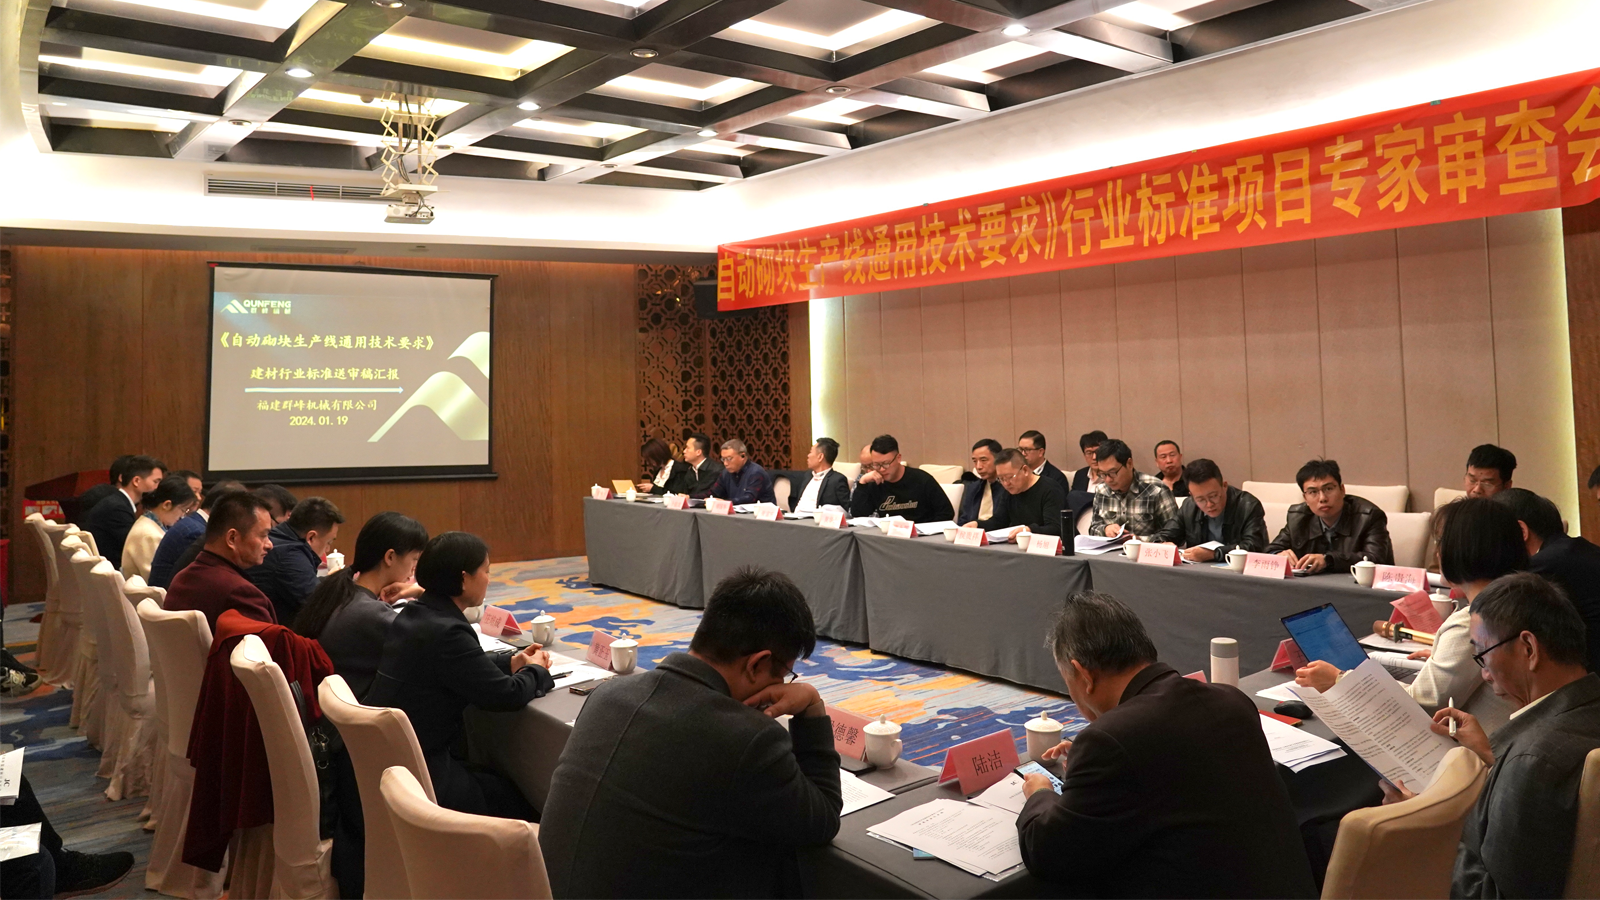 Qunfeng Machinery undertakes the review meeting of the industry standard project ‘General Technical Requirements for Automatic Block Production Line’ to promote the industry